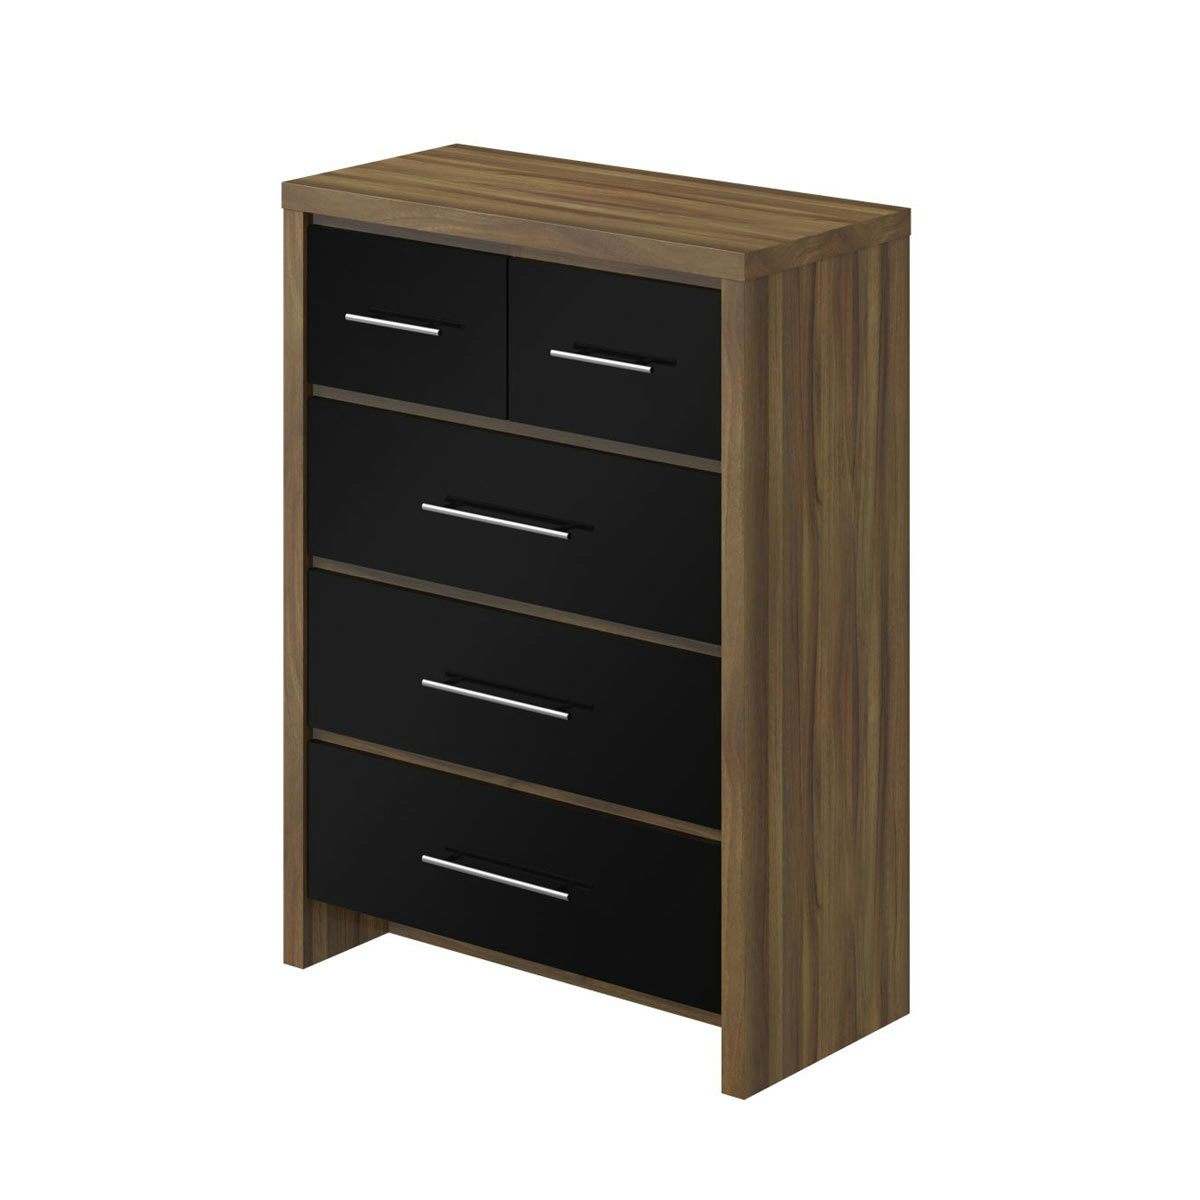 MFI London walnut and black gloss 2 over 3 drawer chest